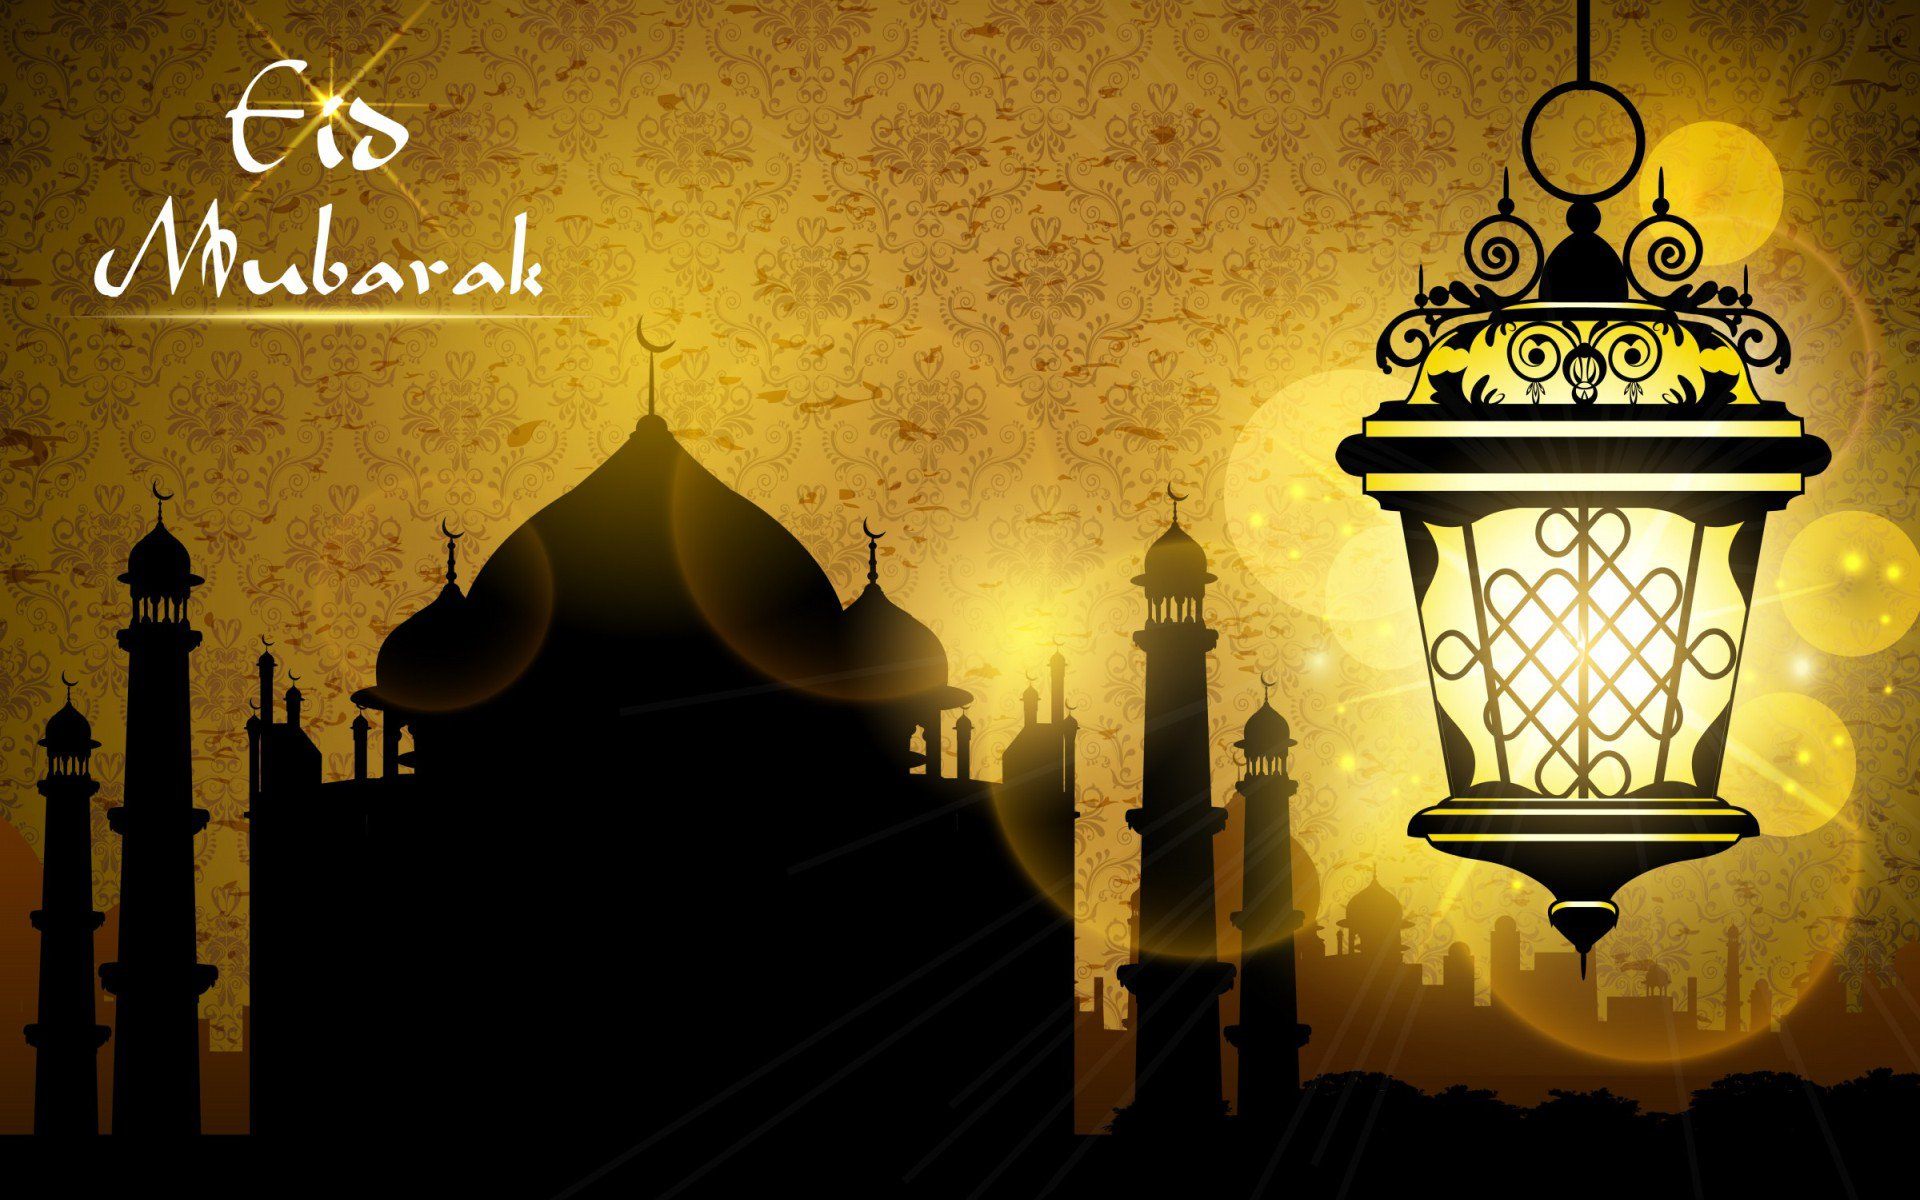 Eid Mubarak Images, Wallpapers, Gifs Photos, HD Pics For DP Profile